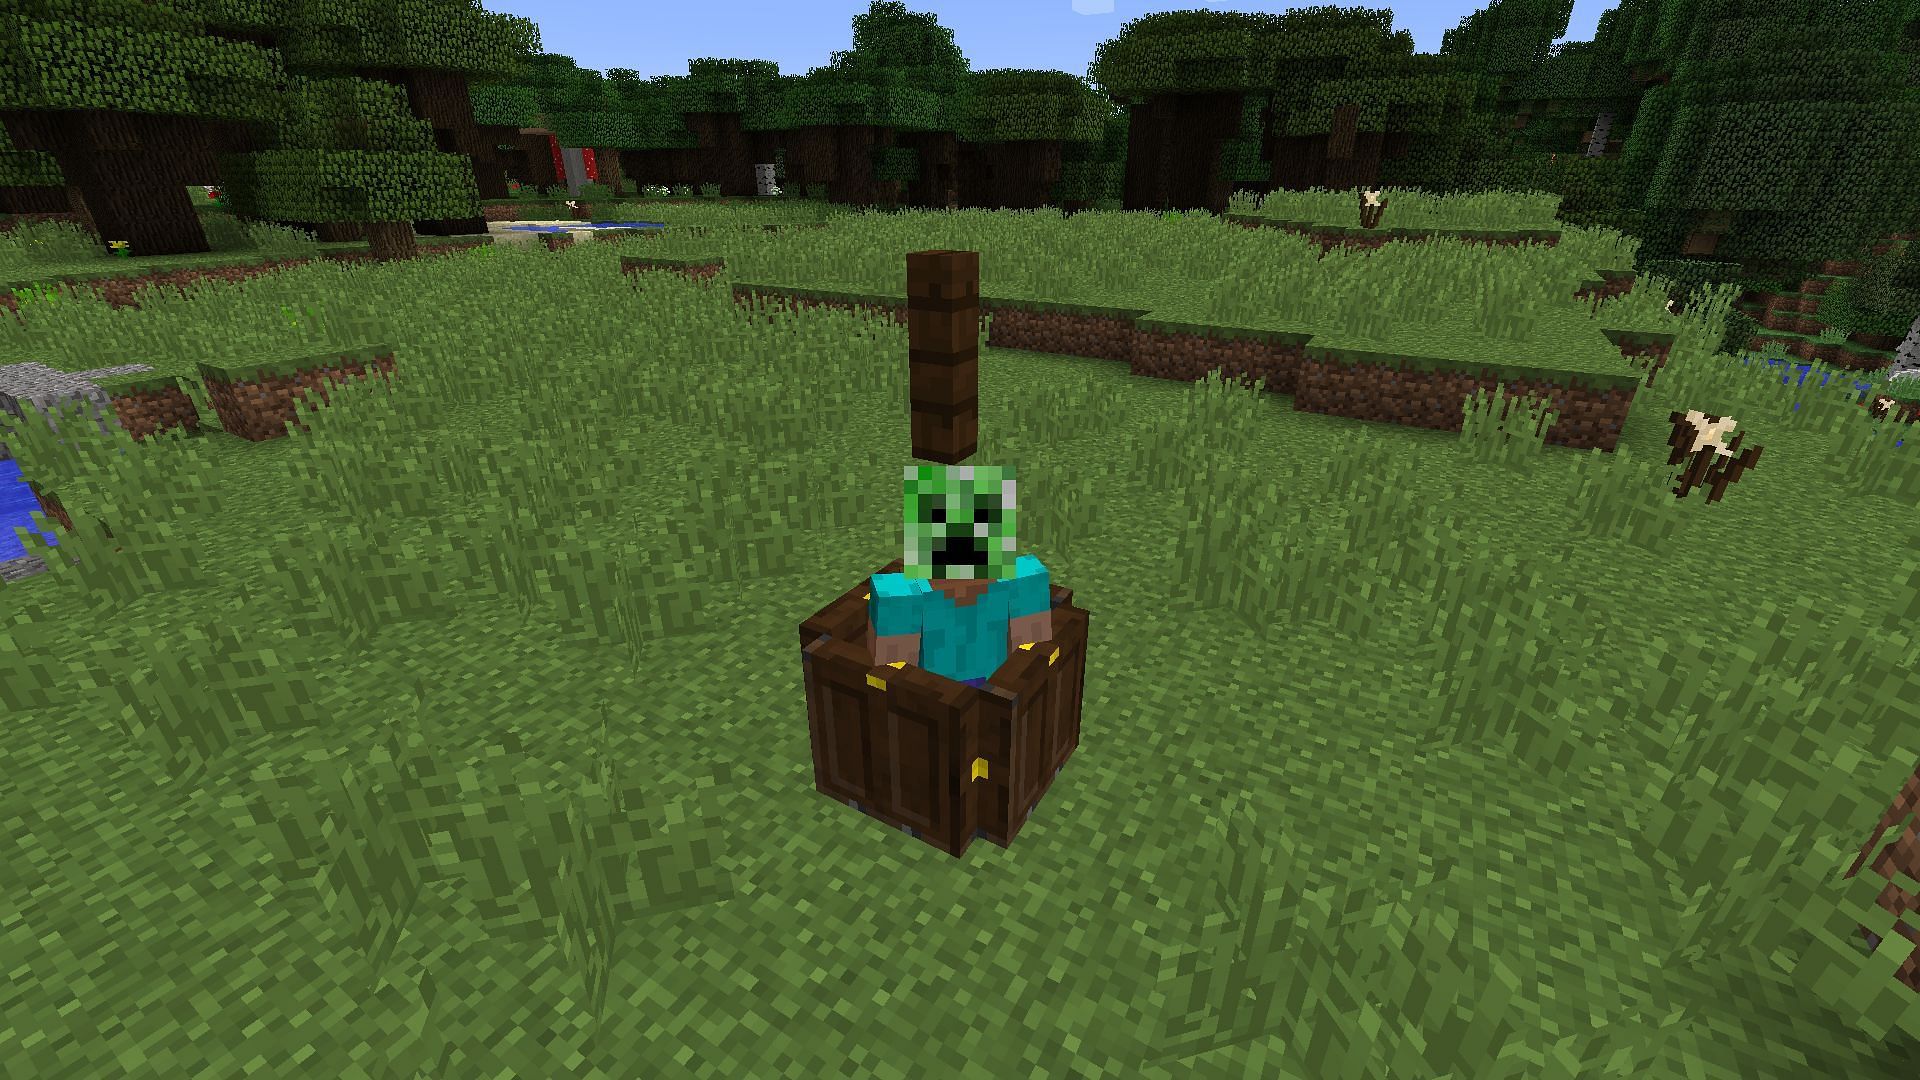 An example trapdoor trap for creepers, or other mobs (Image via Minecraft)